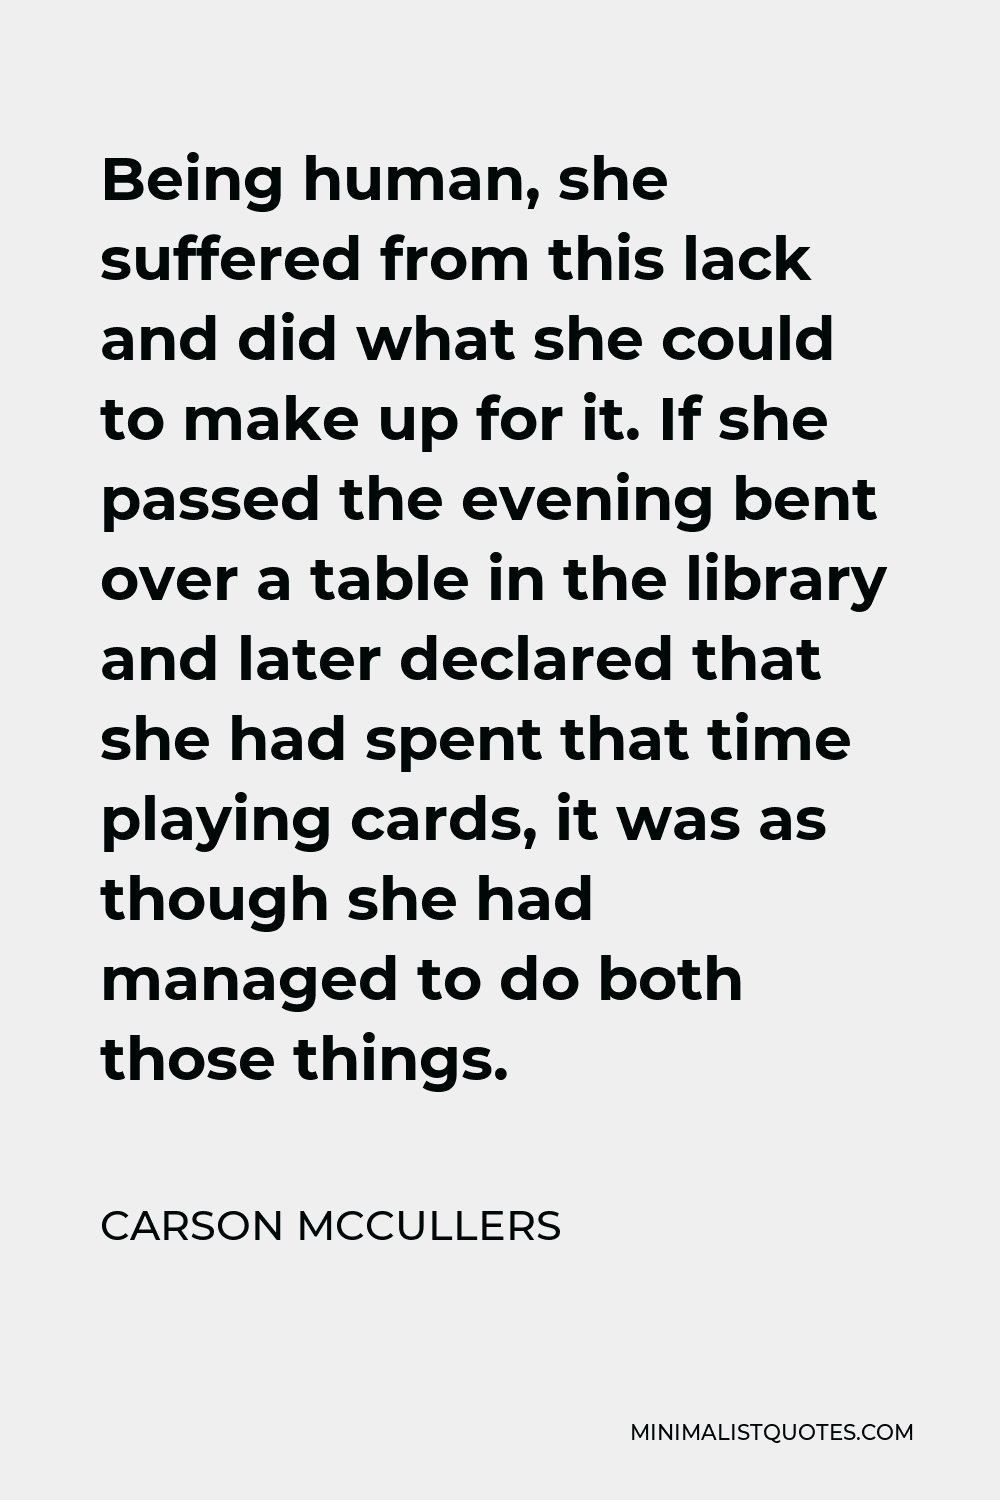 Carson McCullers Quote - Being human, she suffered from this lack and did what she could to make up for it. If she passed the evening bent over a table in the library and later declared that she had spent that time playing cards, it was as though she had managed to do both those things.